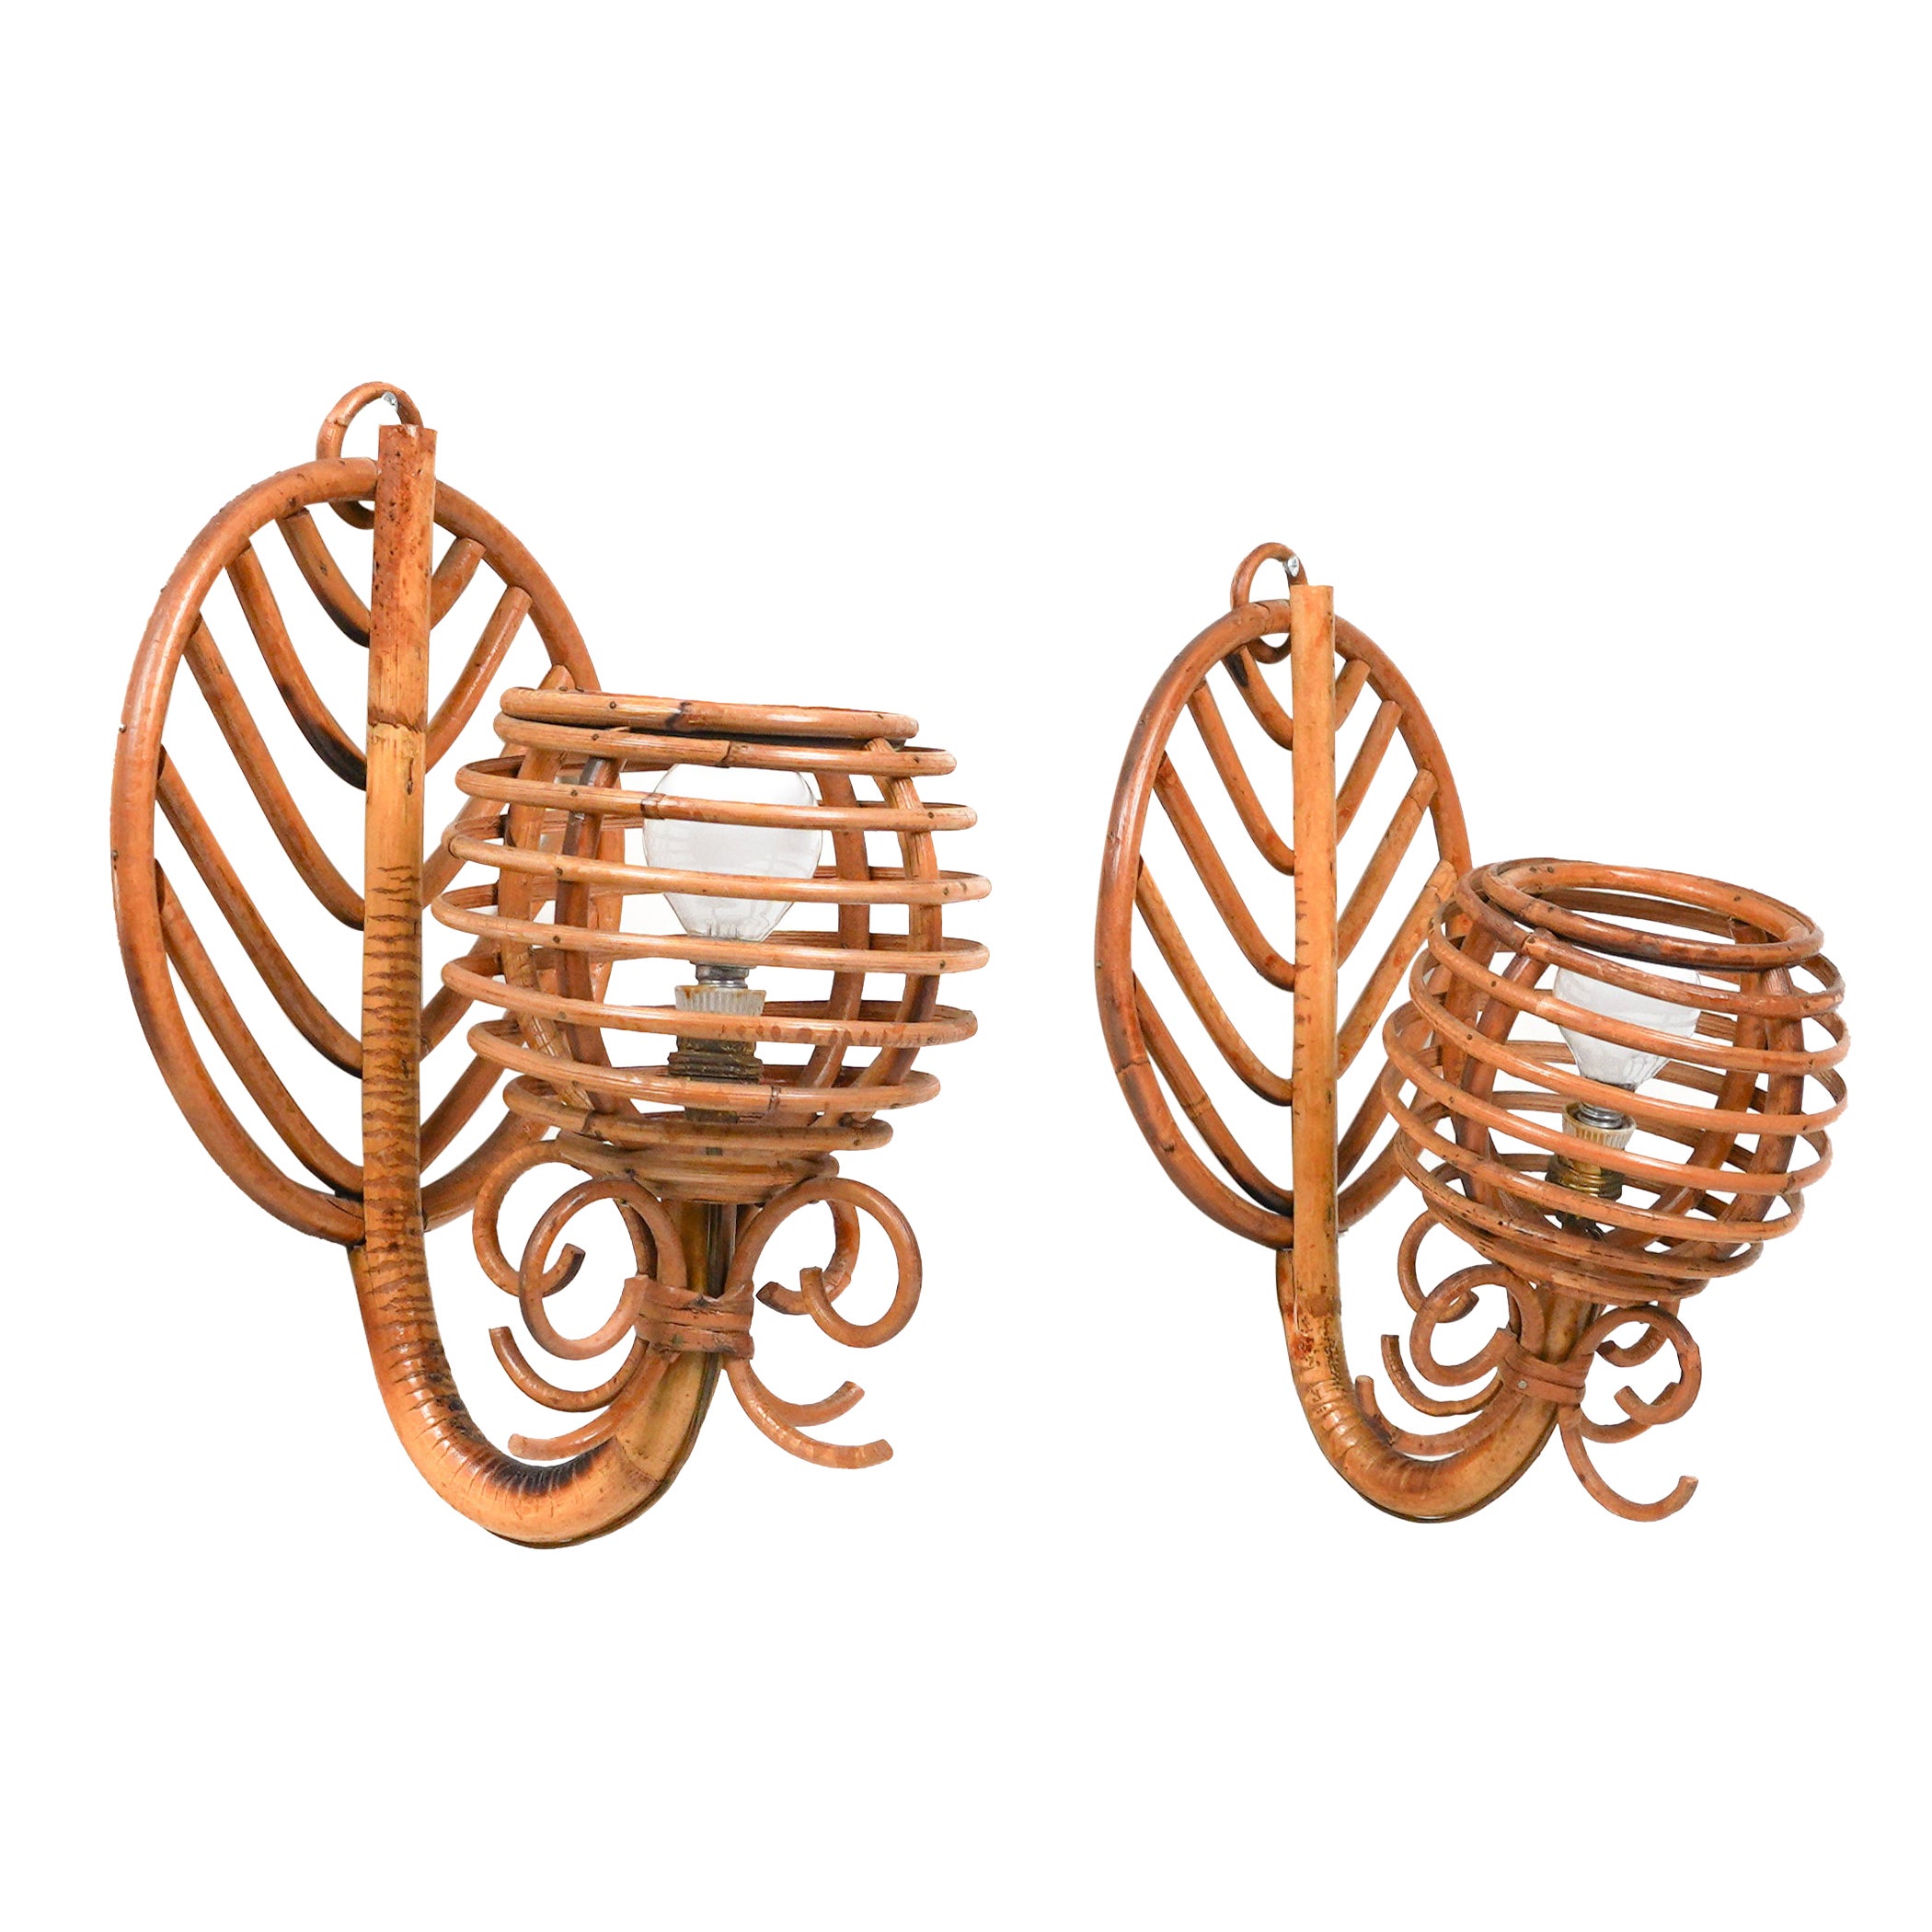 Rattan & Bamboo Pair of Sconces Lantern Attributed to Louis Sognot, France 1960s For Sale